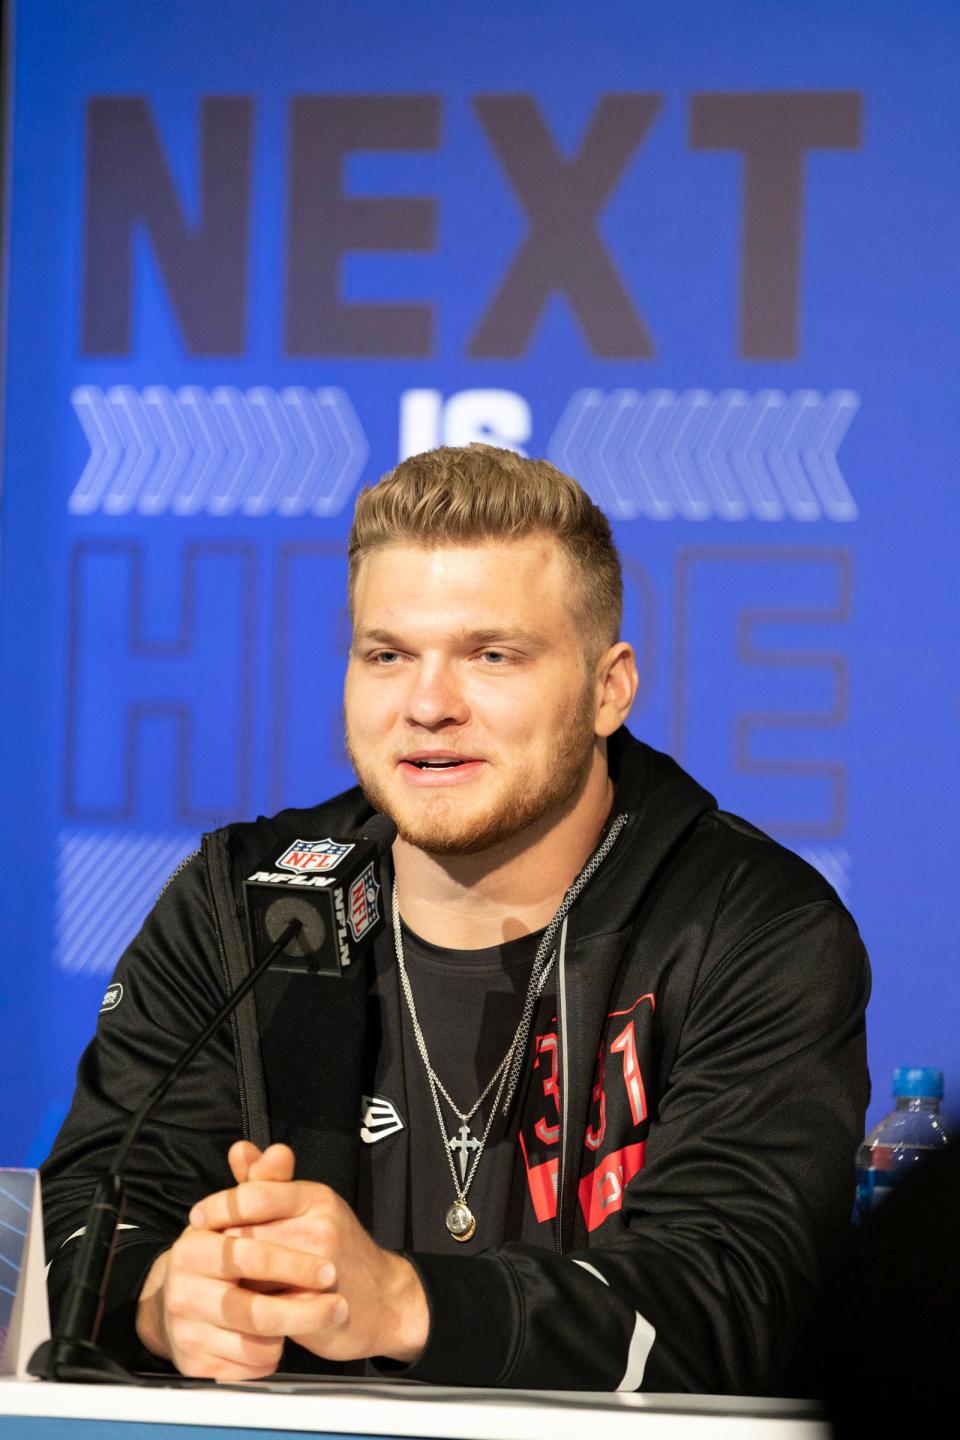 Michigan defensive lineman Aidan Hutchinson (DL31)  speaks during a news conference at the NFL combine in Indianapolis on Friday, March 4, 2022.